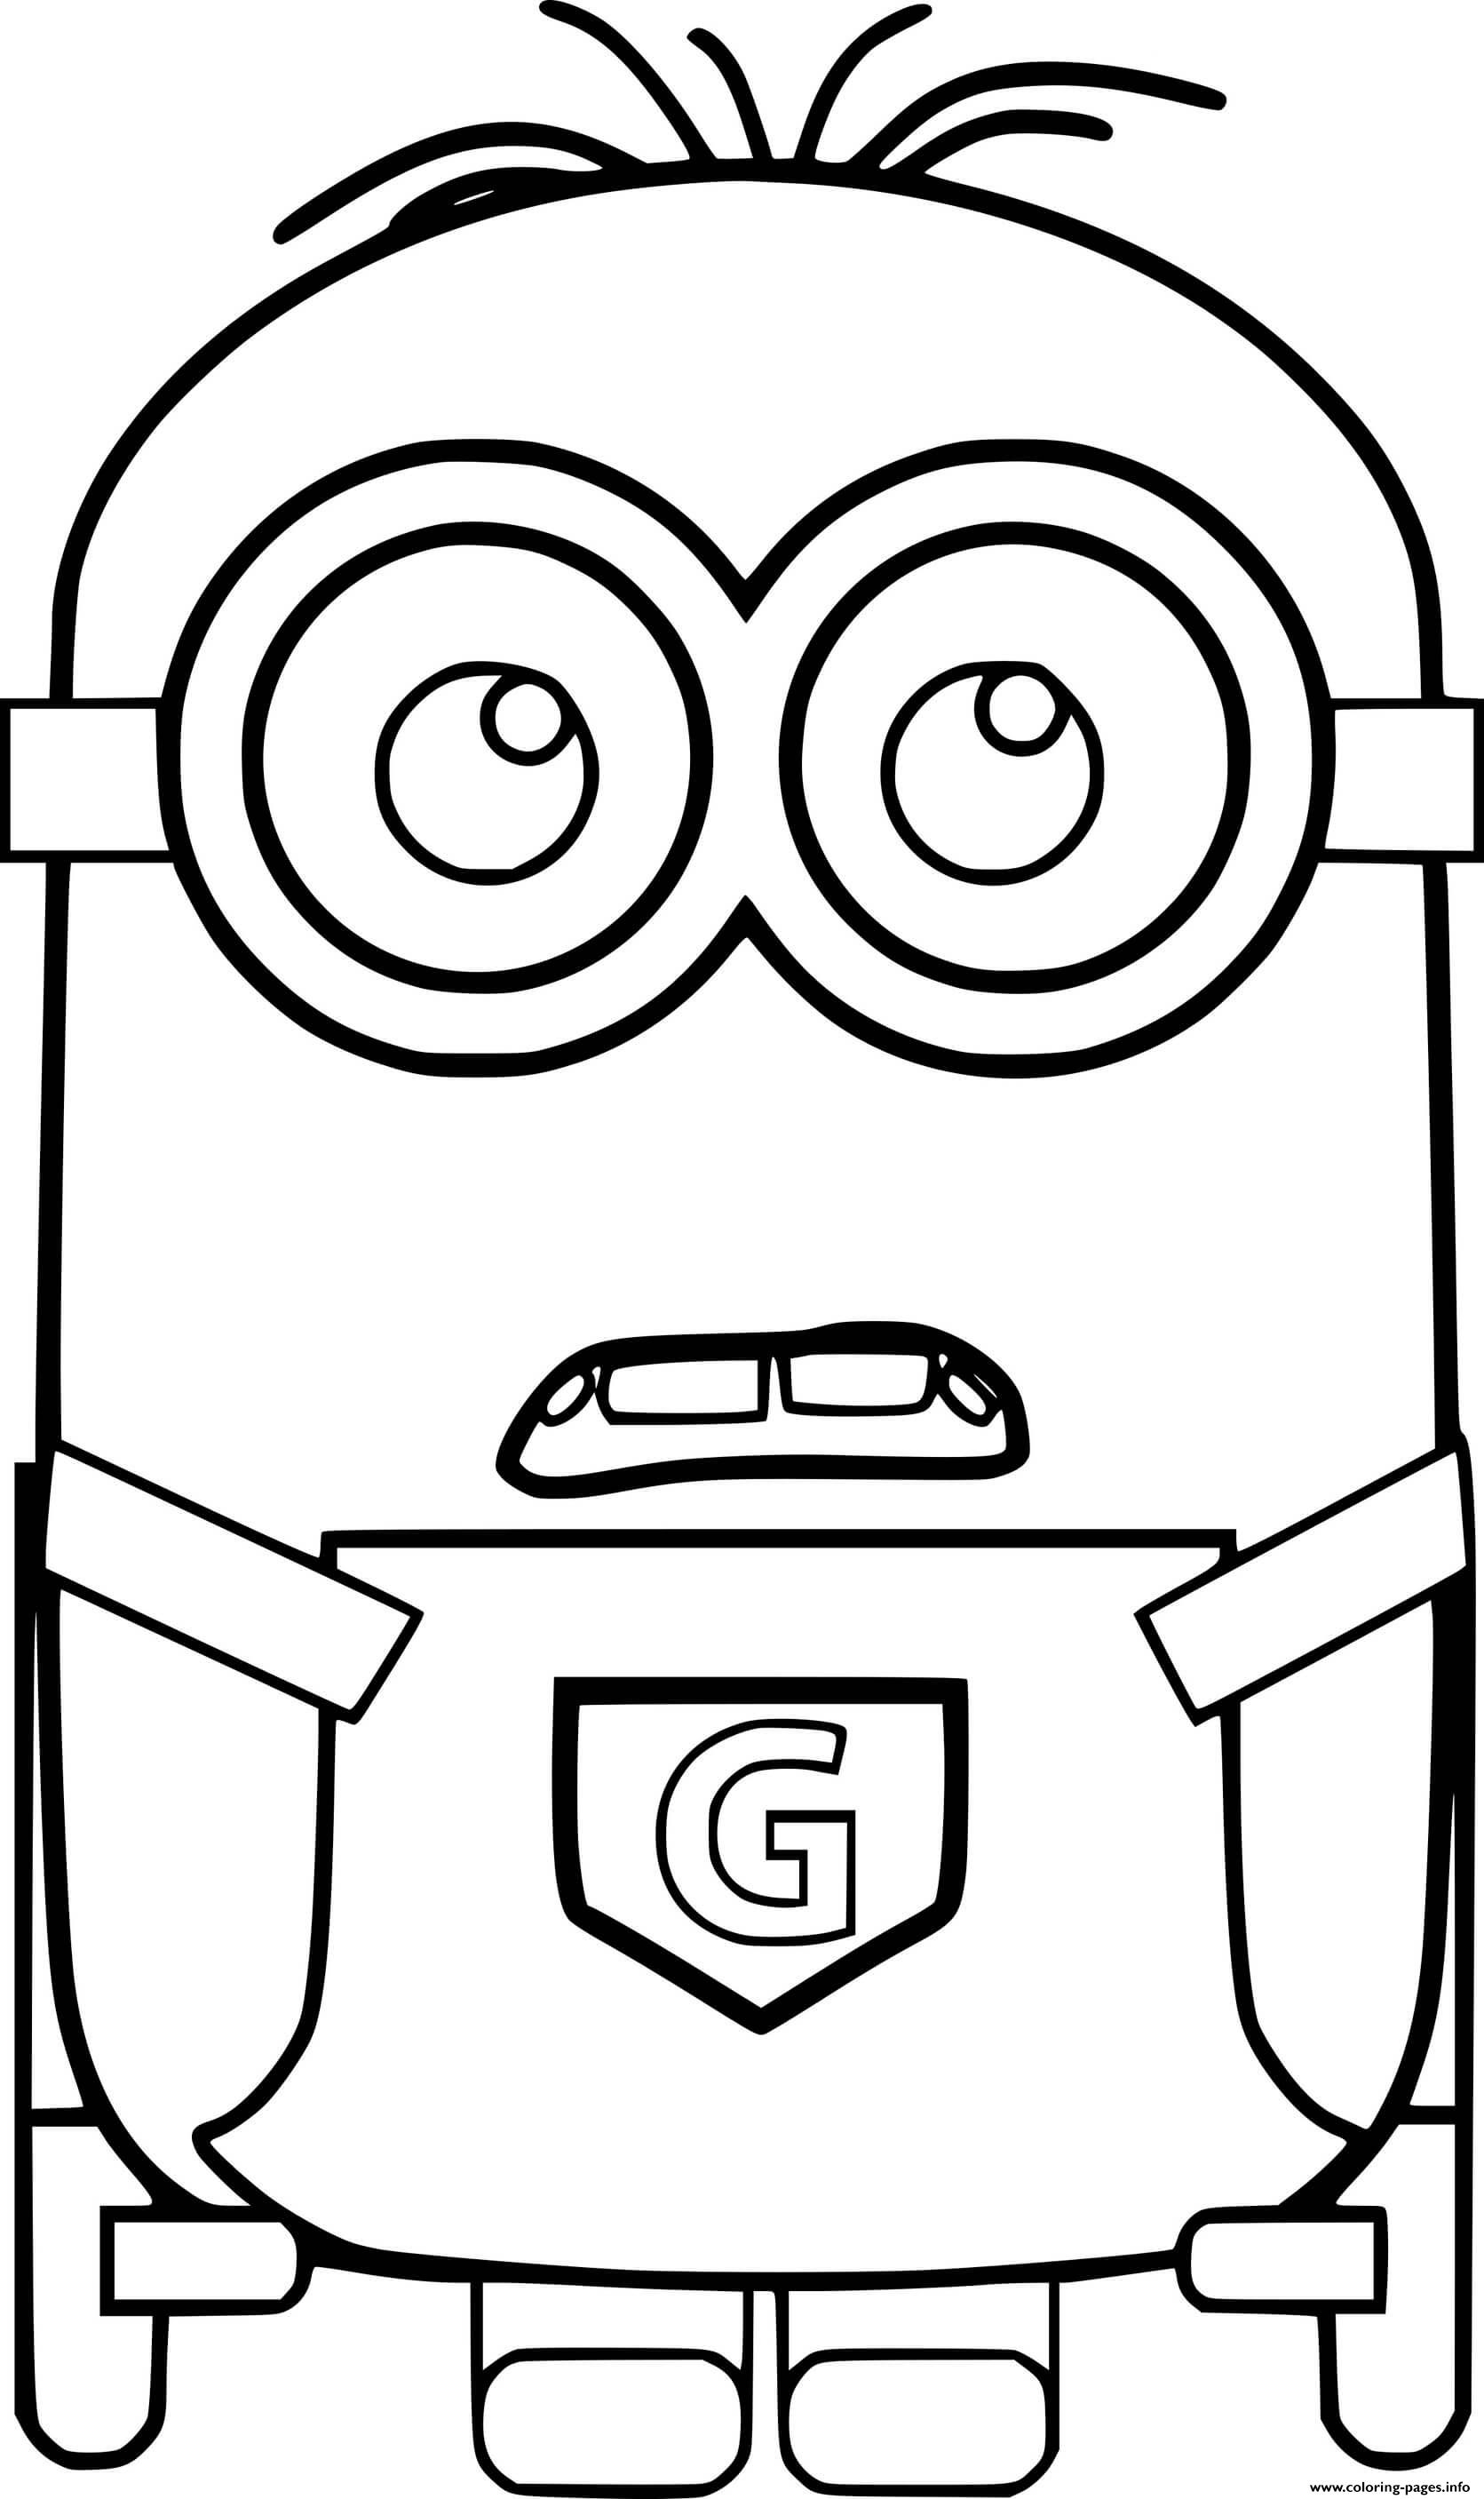 Minion With G coloring